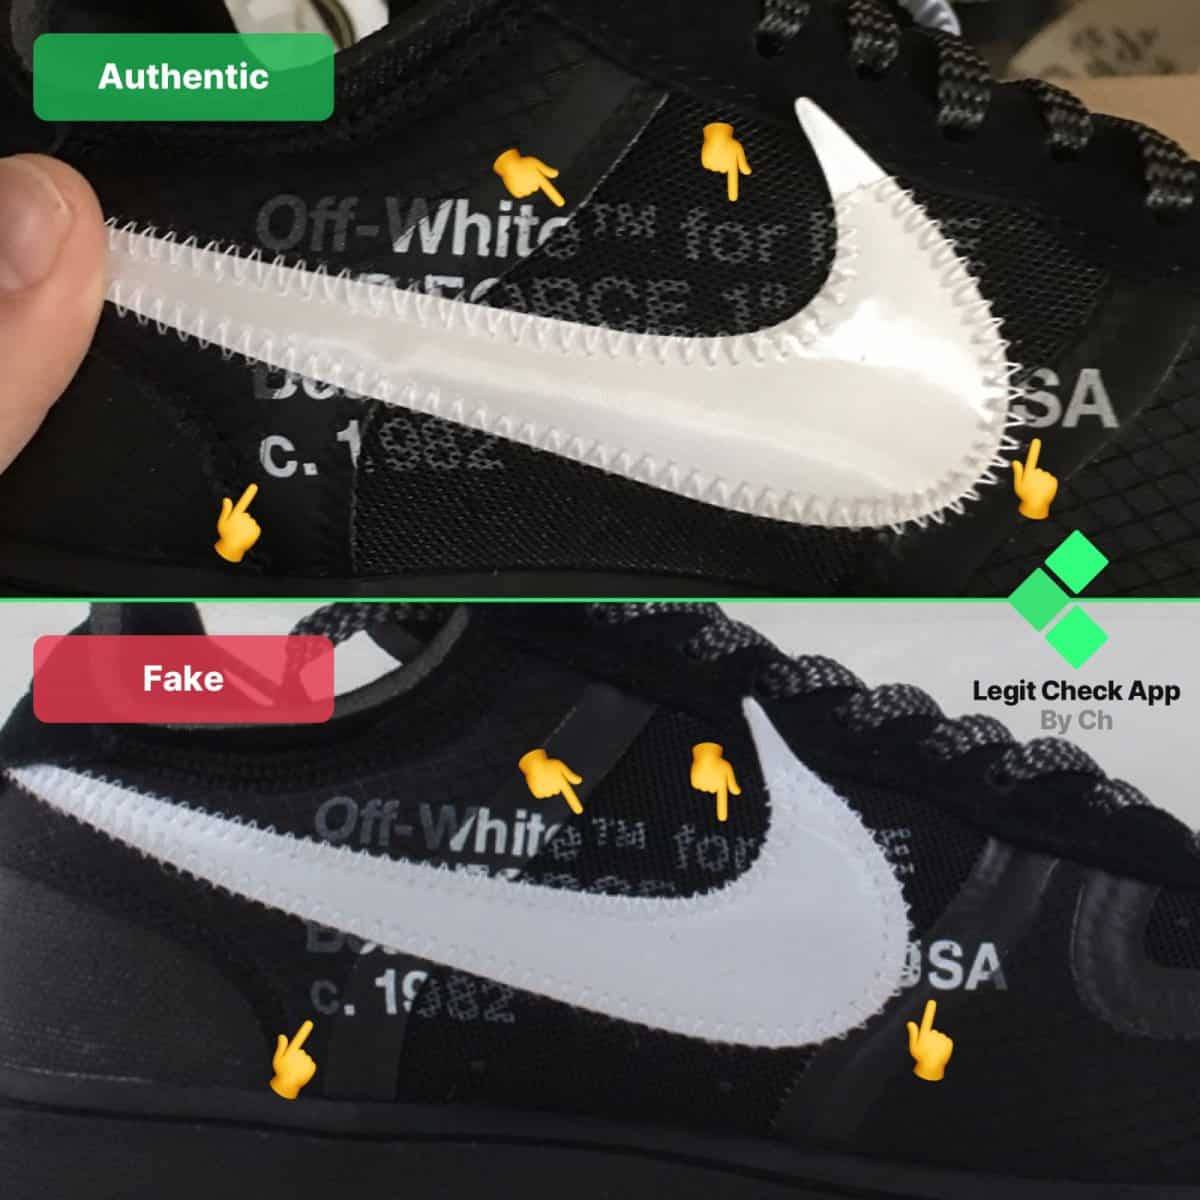 hele Diskret justering How To Spot The Fake Off-White Nike Air Force 1 Black - Legit Check By Ch